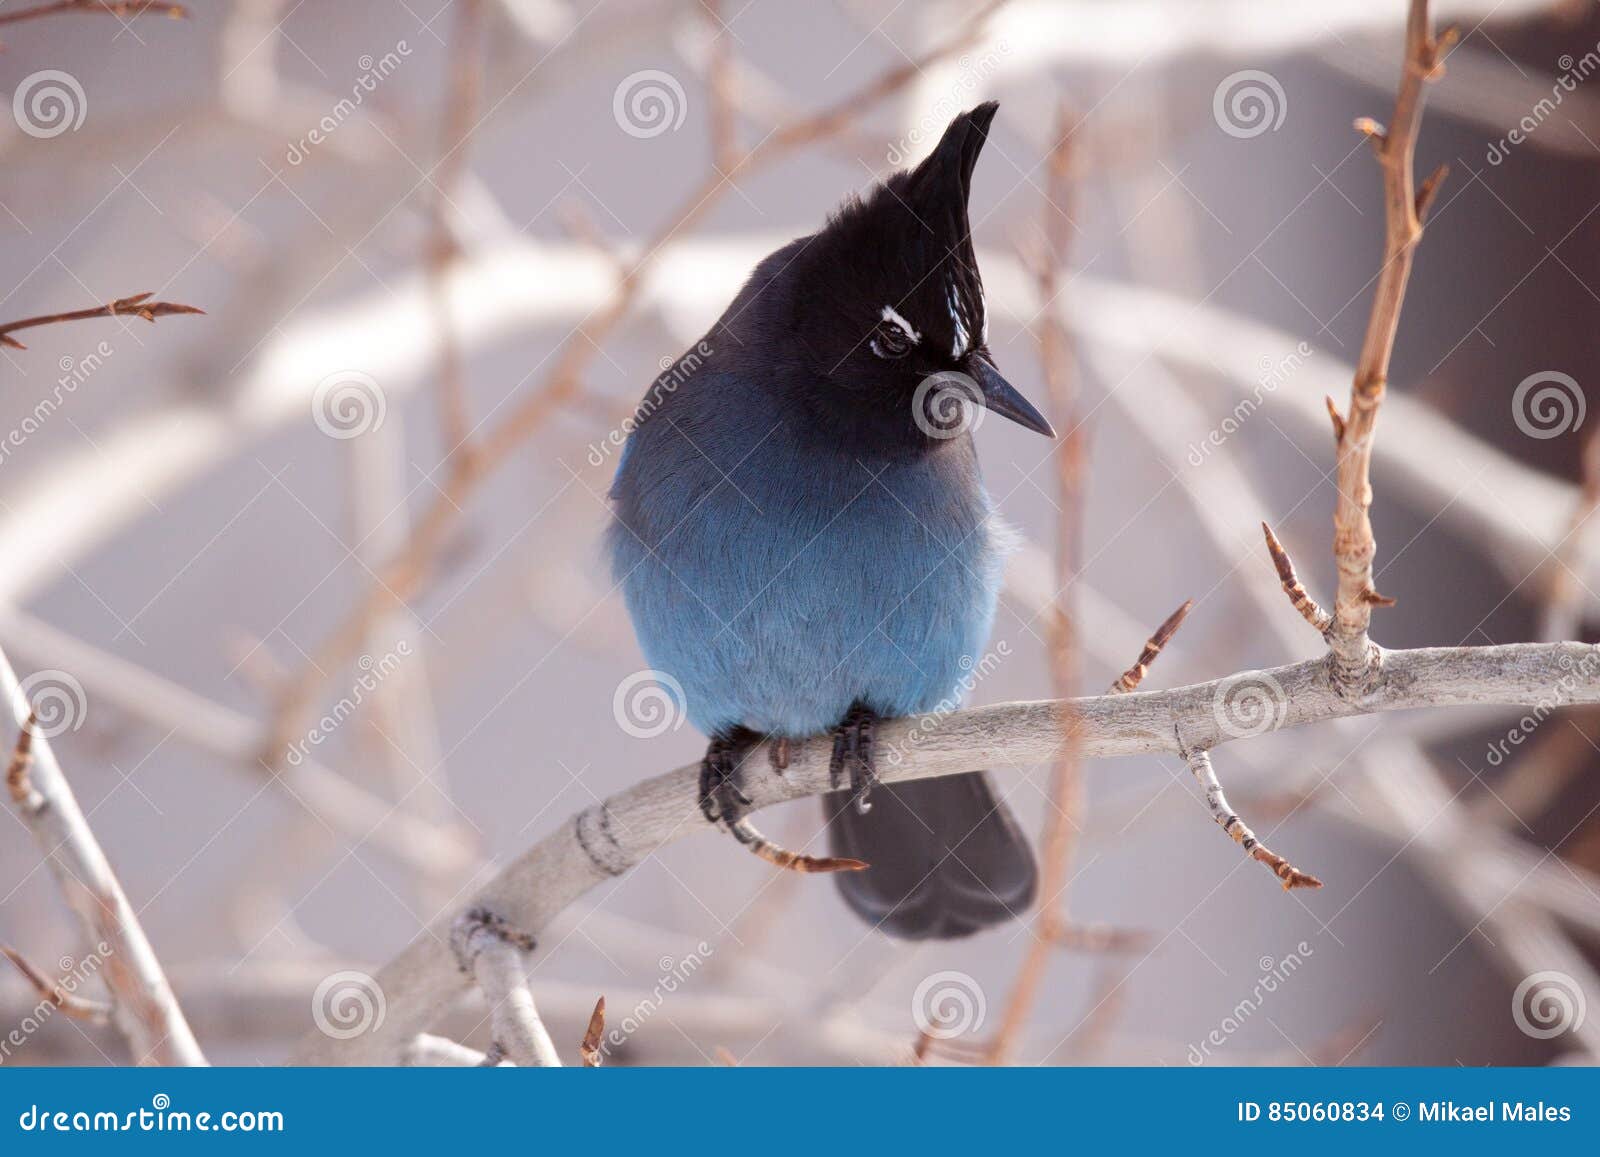 stellar jay looking to his side